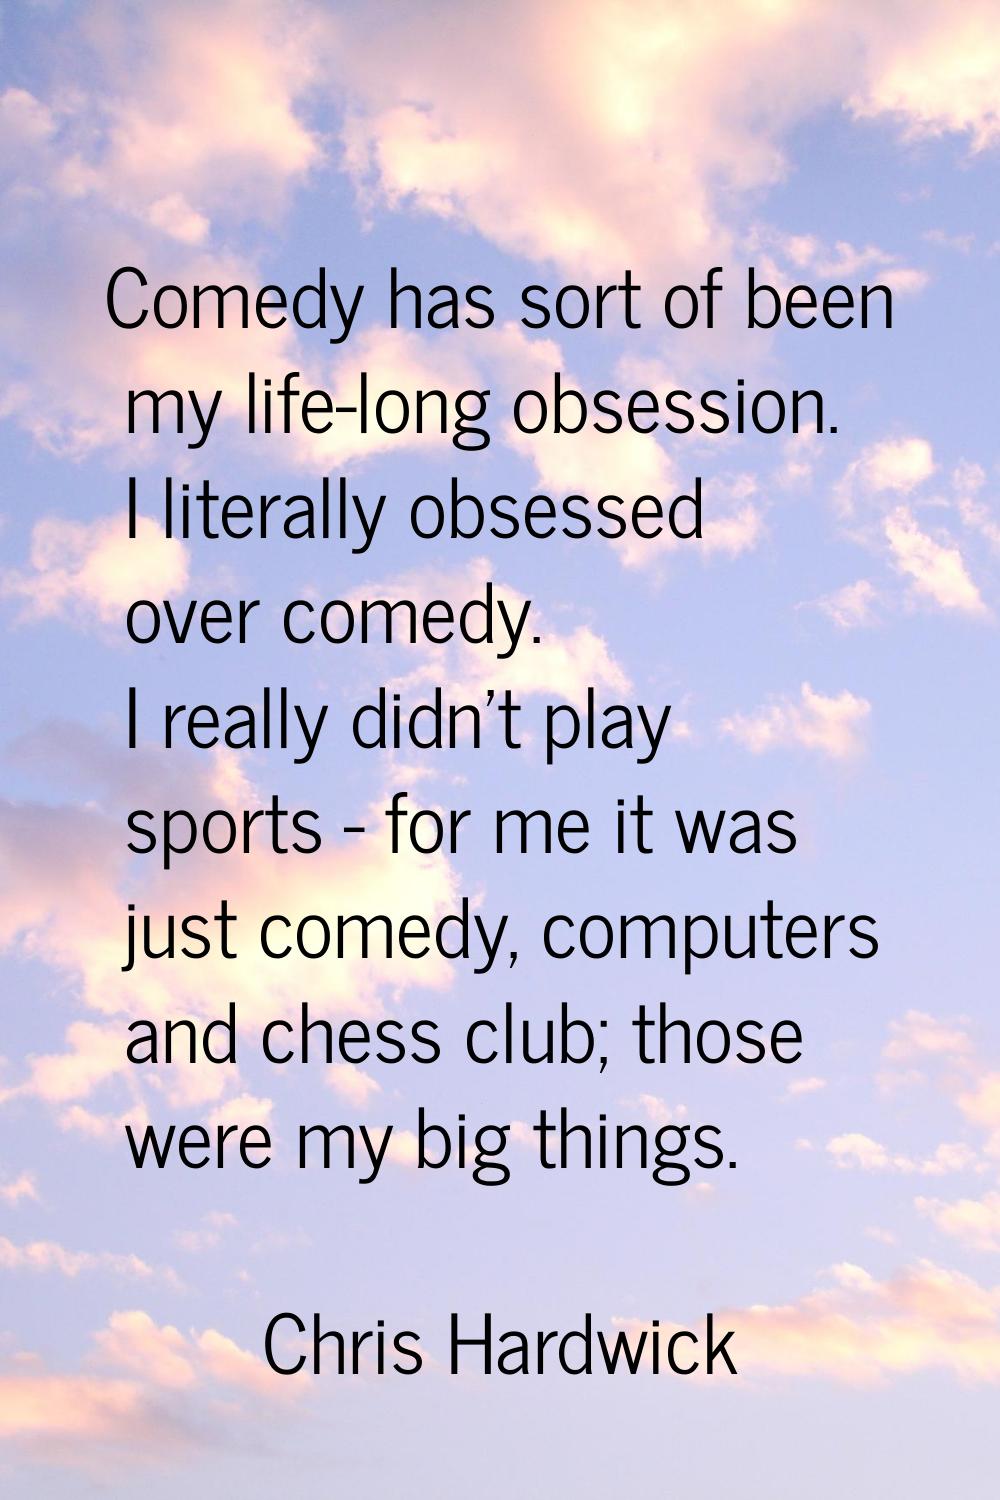 Comedy has sort of been my life-long obsession. I literally obsessed over comedy. I really didn't p